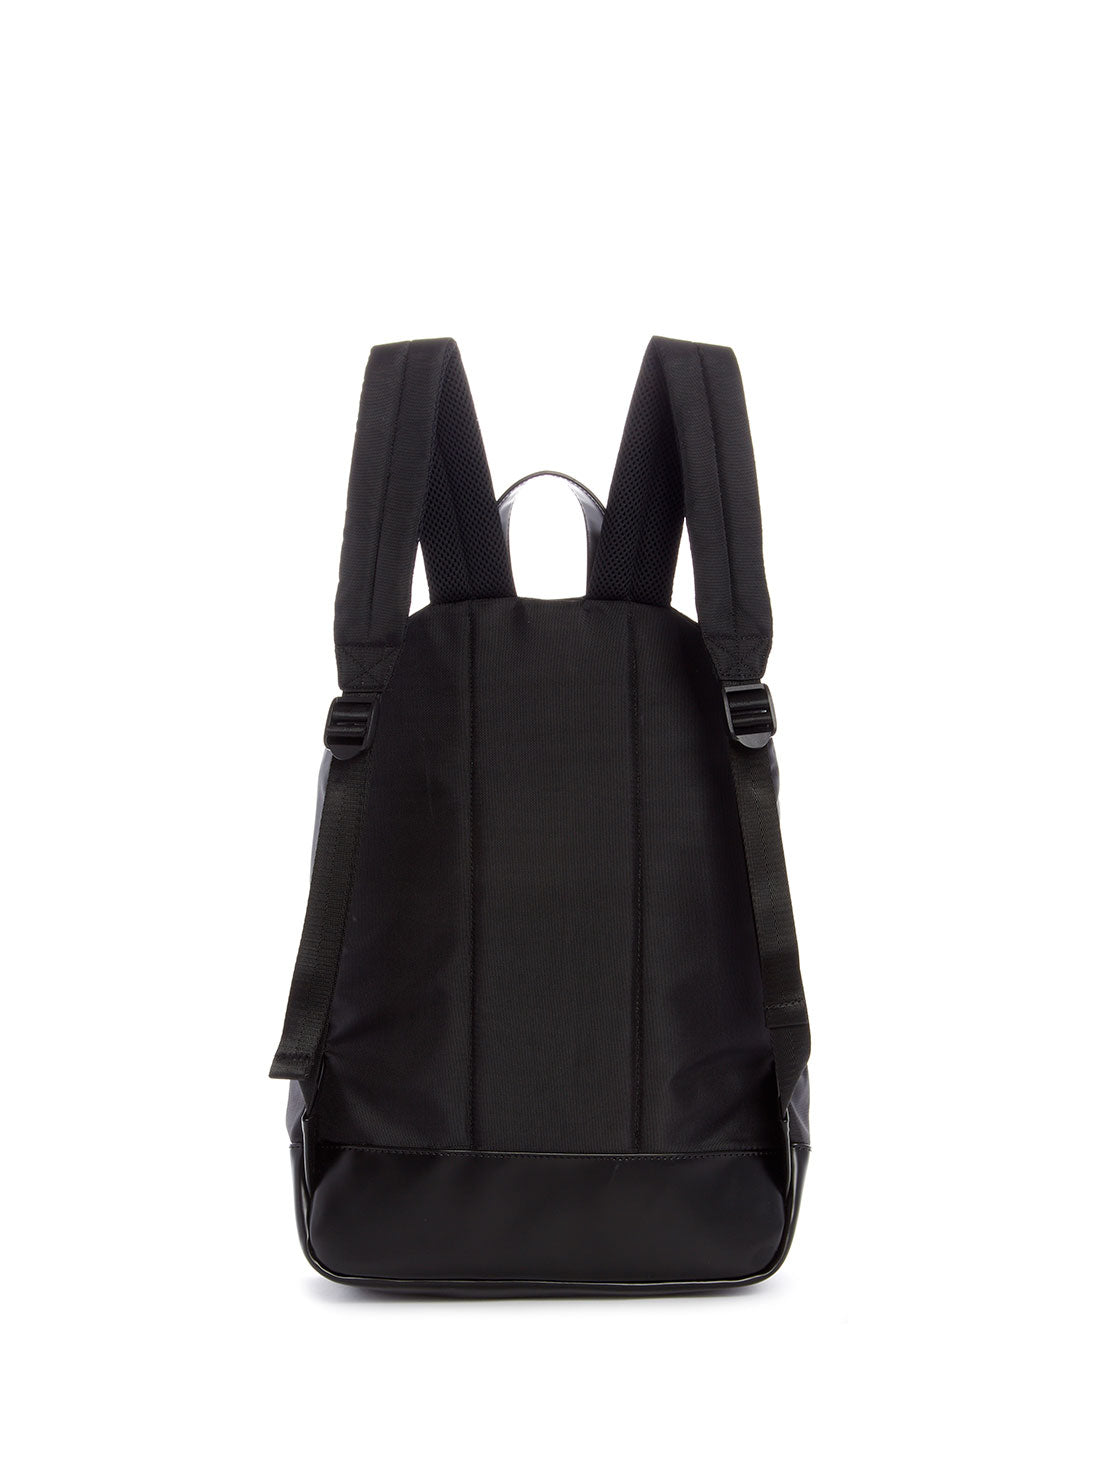 Black GUESS Duo Backpack back view